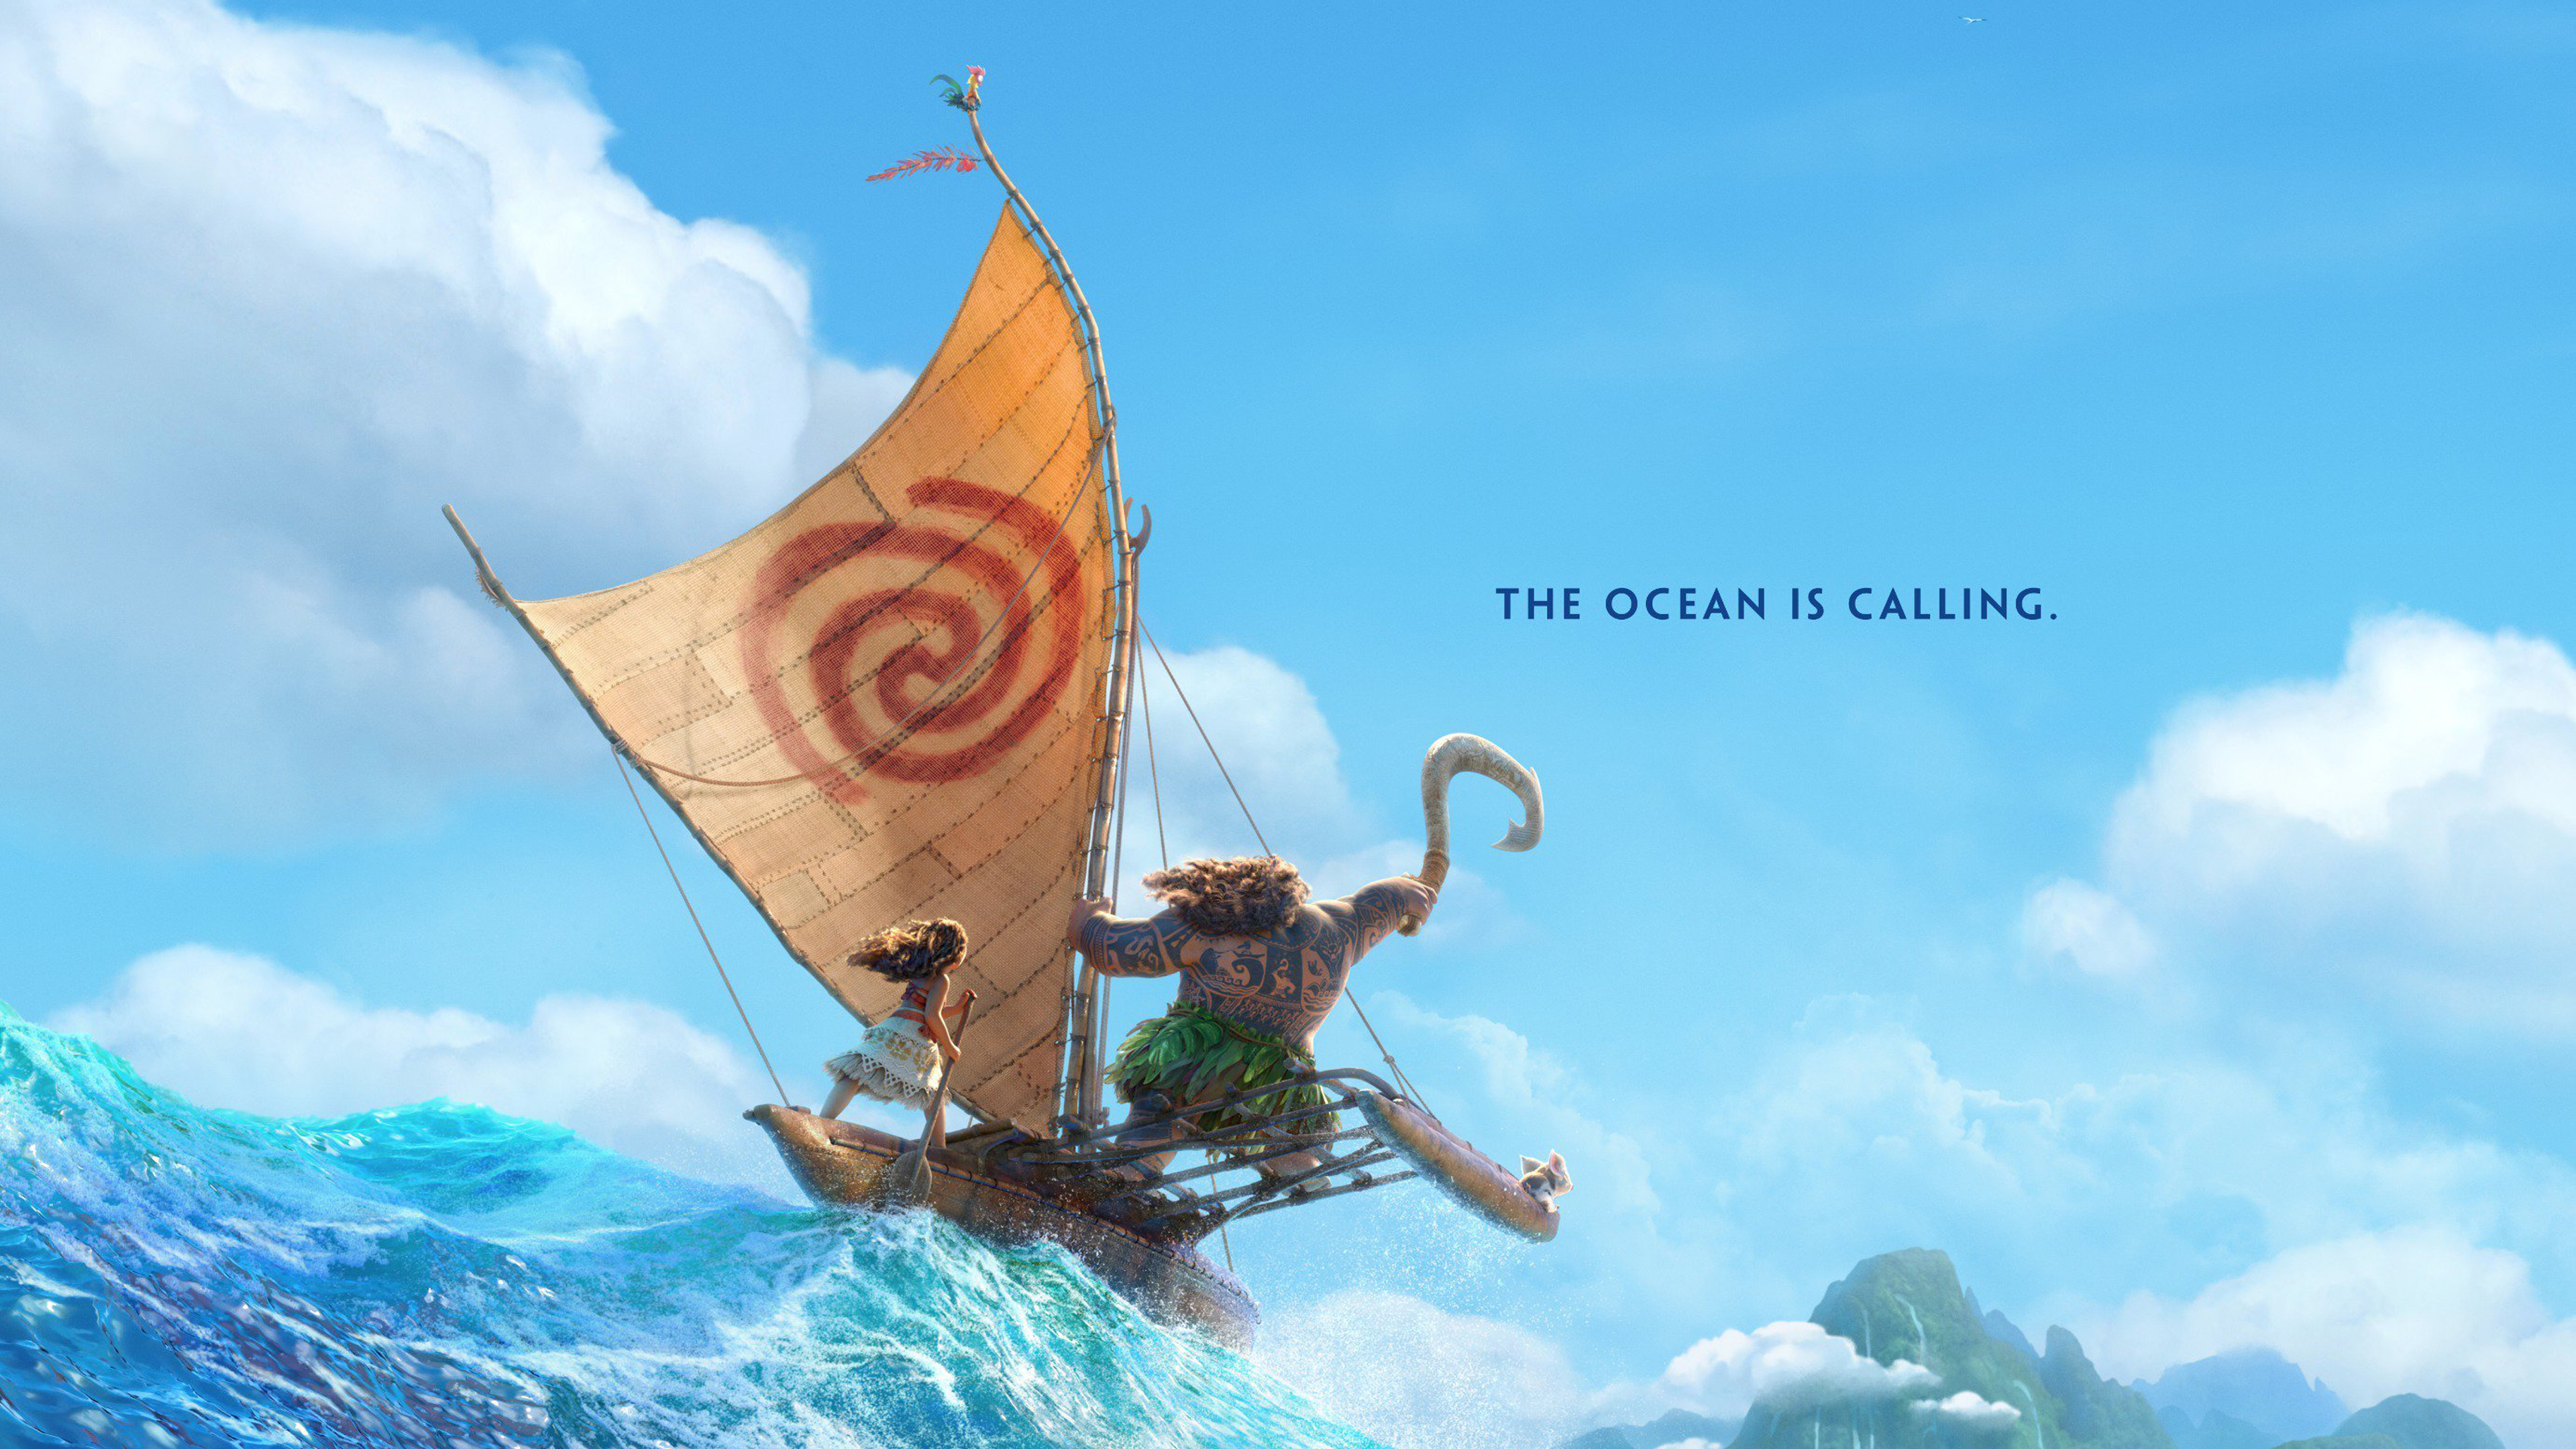 http://hdqwalls.com/wallpapers/moana-2016-animated-movie-ad.jpg